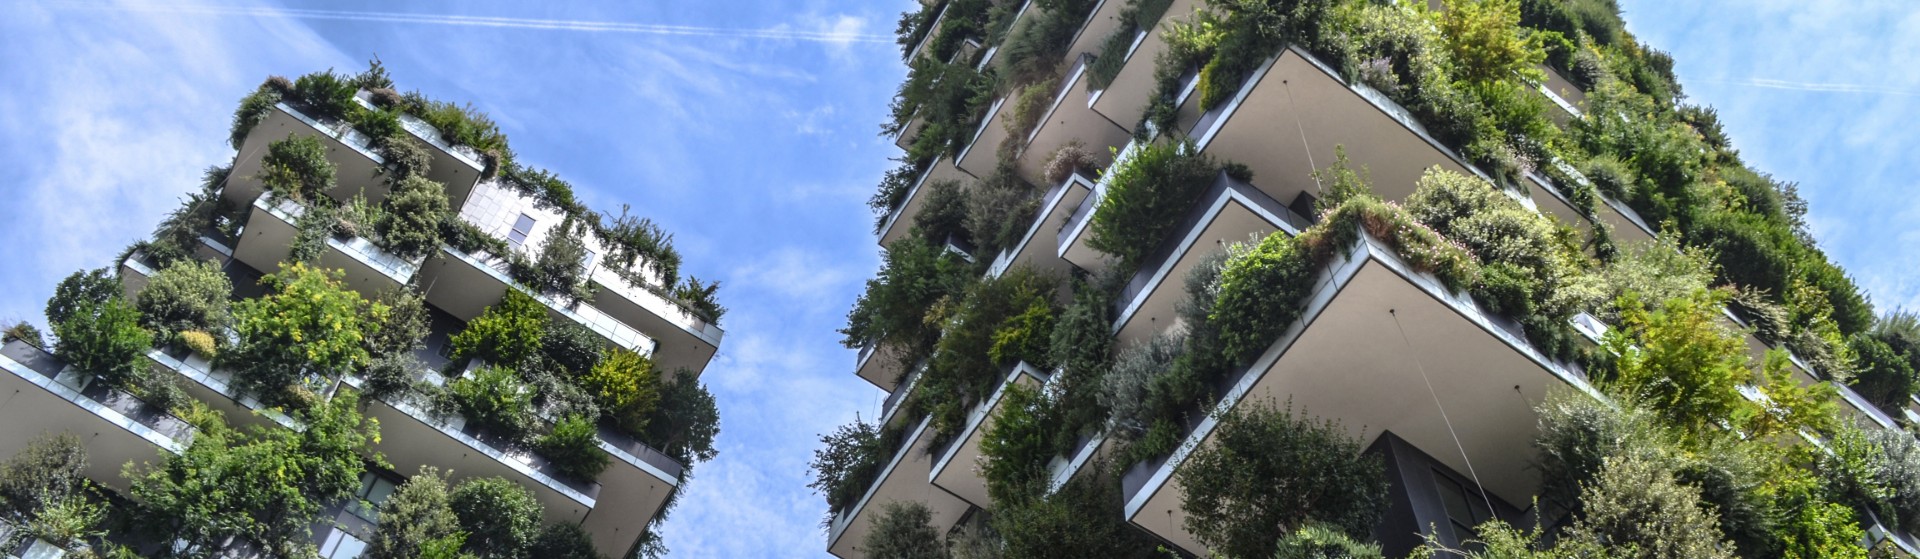 Looking up at a multi storey residential building with lots of foliage.